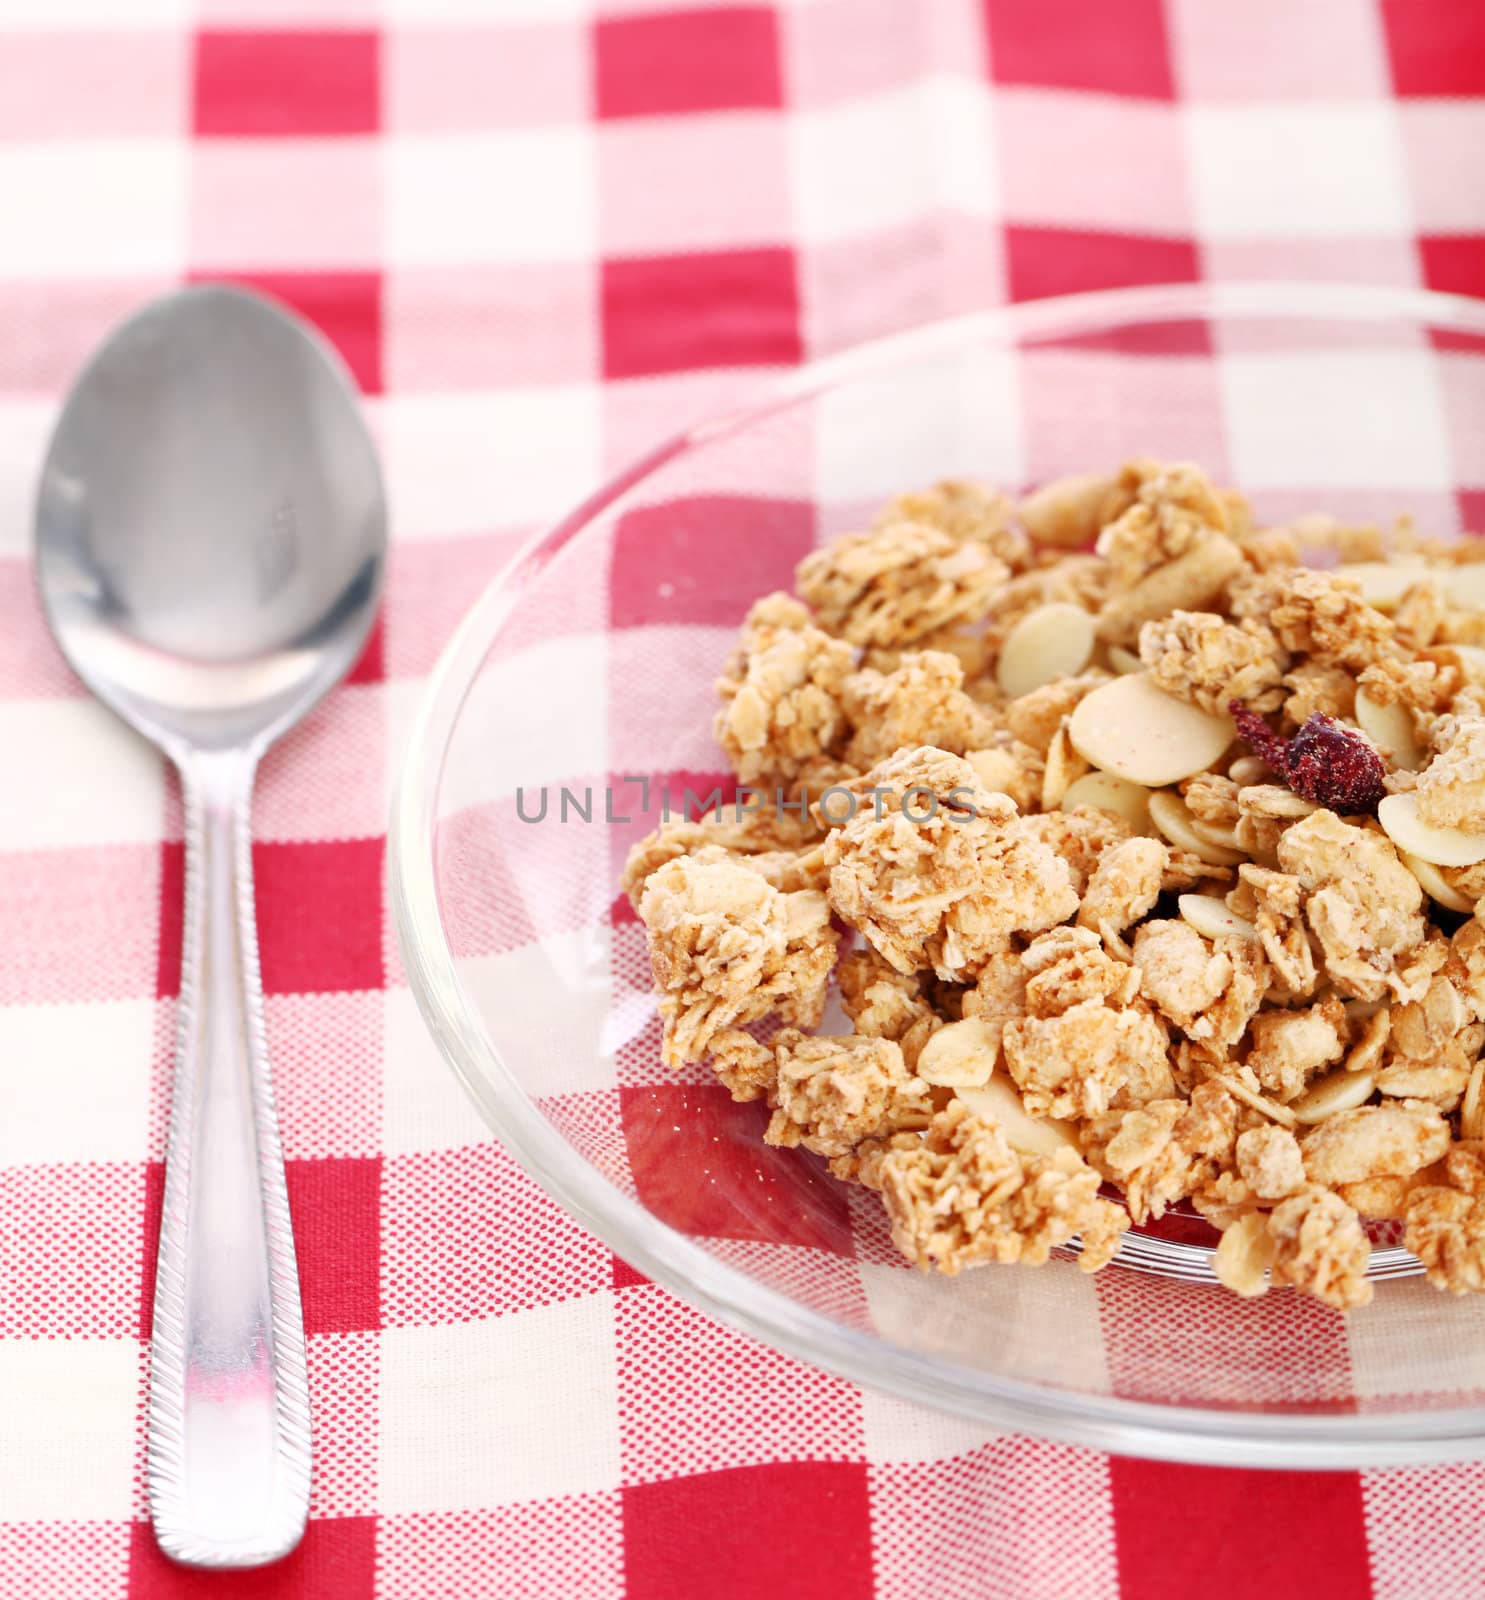 Healthy wholegrain muesli in a plate with silver spoon on a squared tablecloth